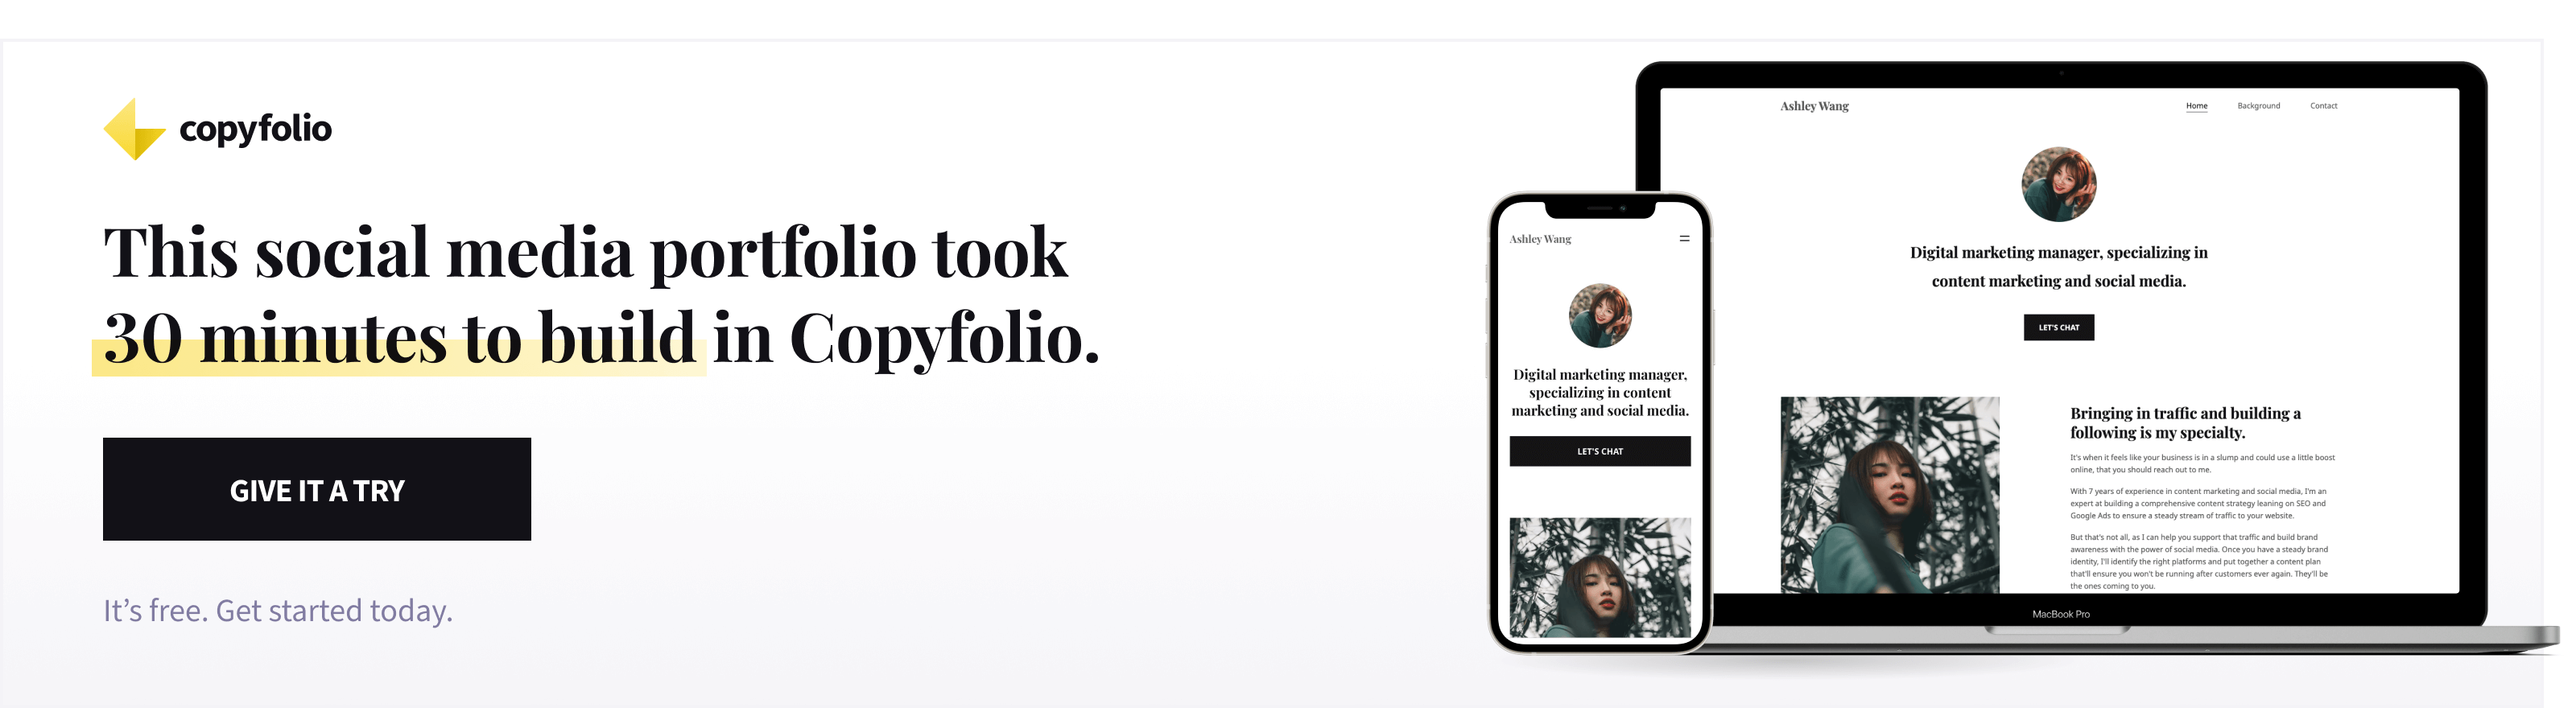 Banner with the following text: this social media portfolio took 30 minutes to build in Copyfolio. Give it a try. It's free. Get started today.